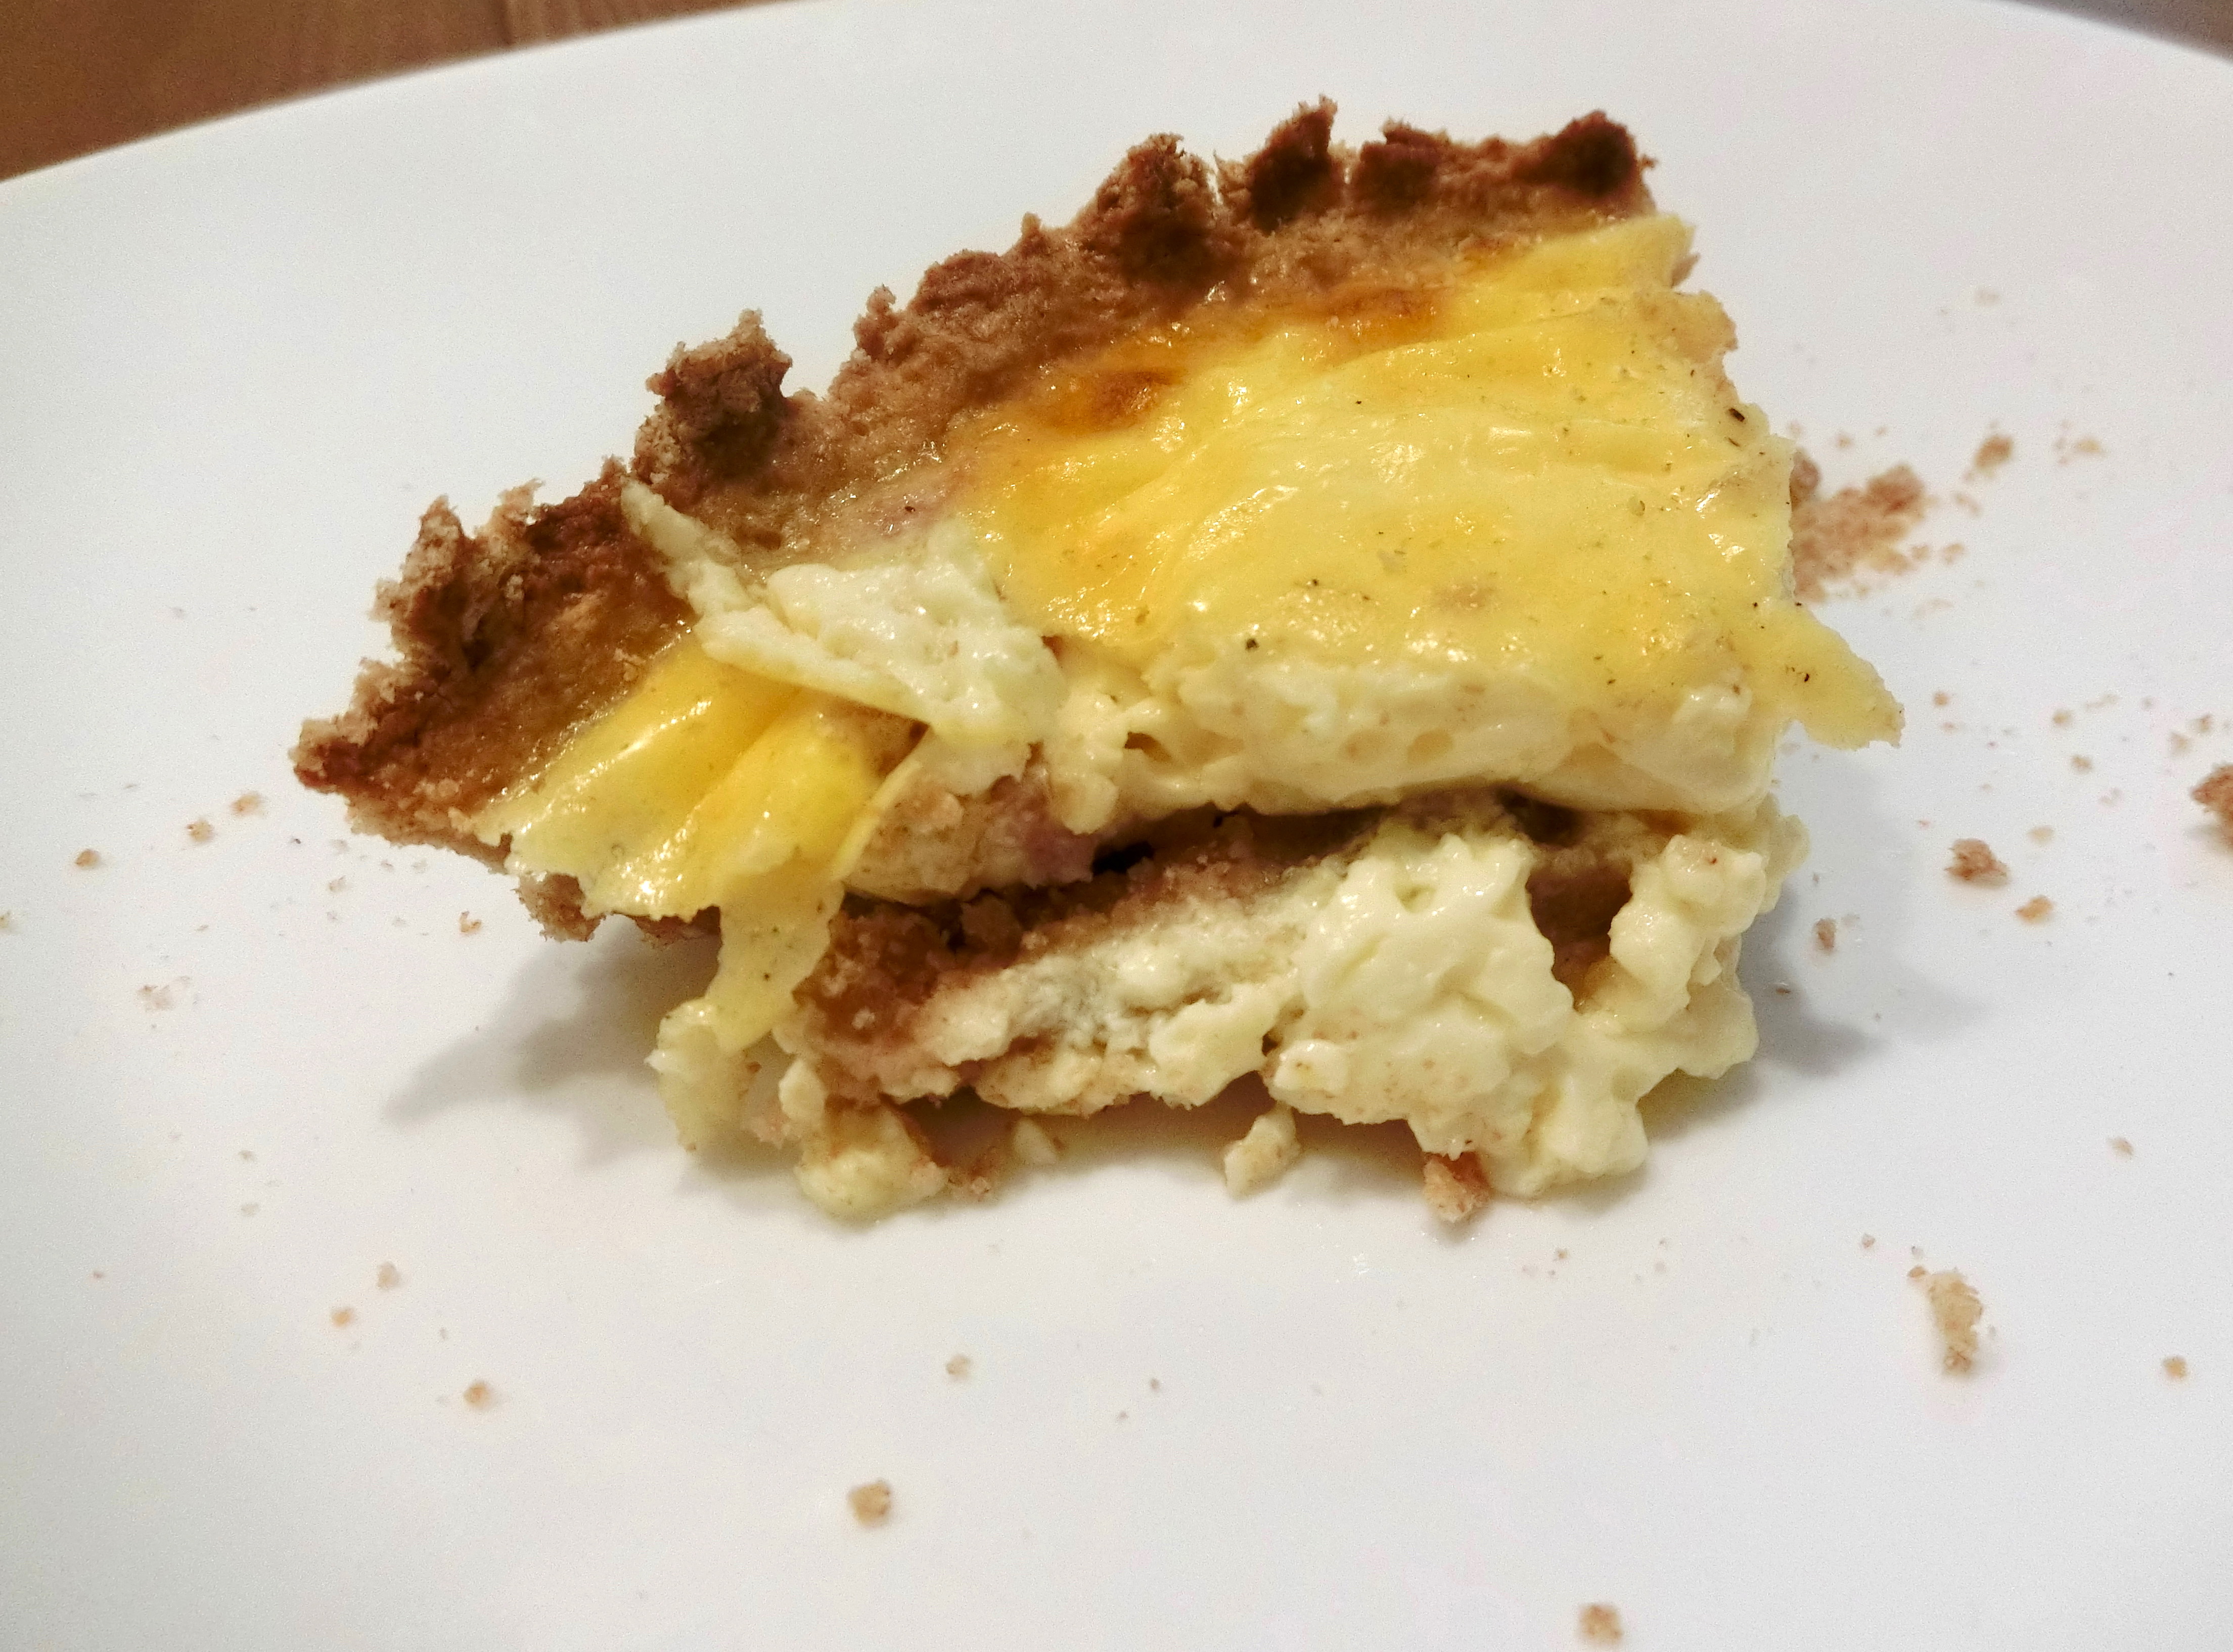 a crumbly quiche